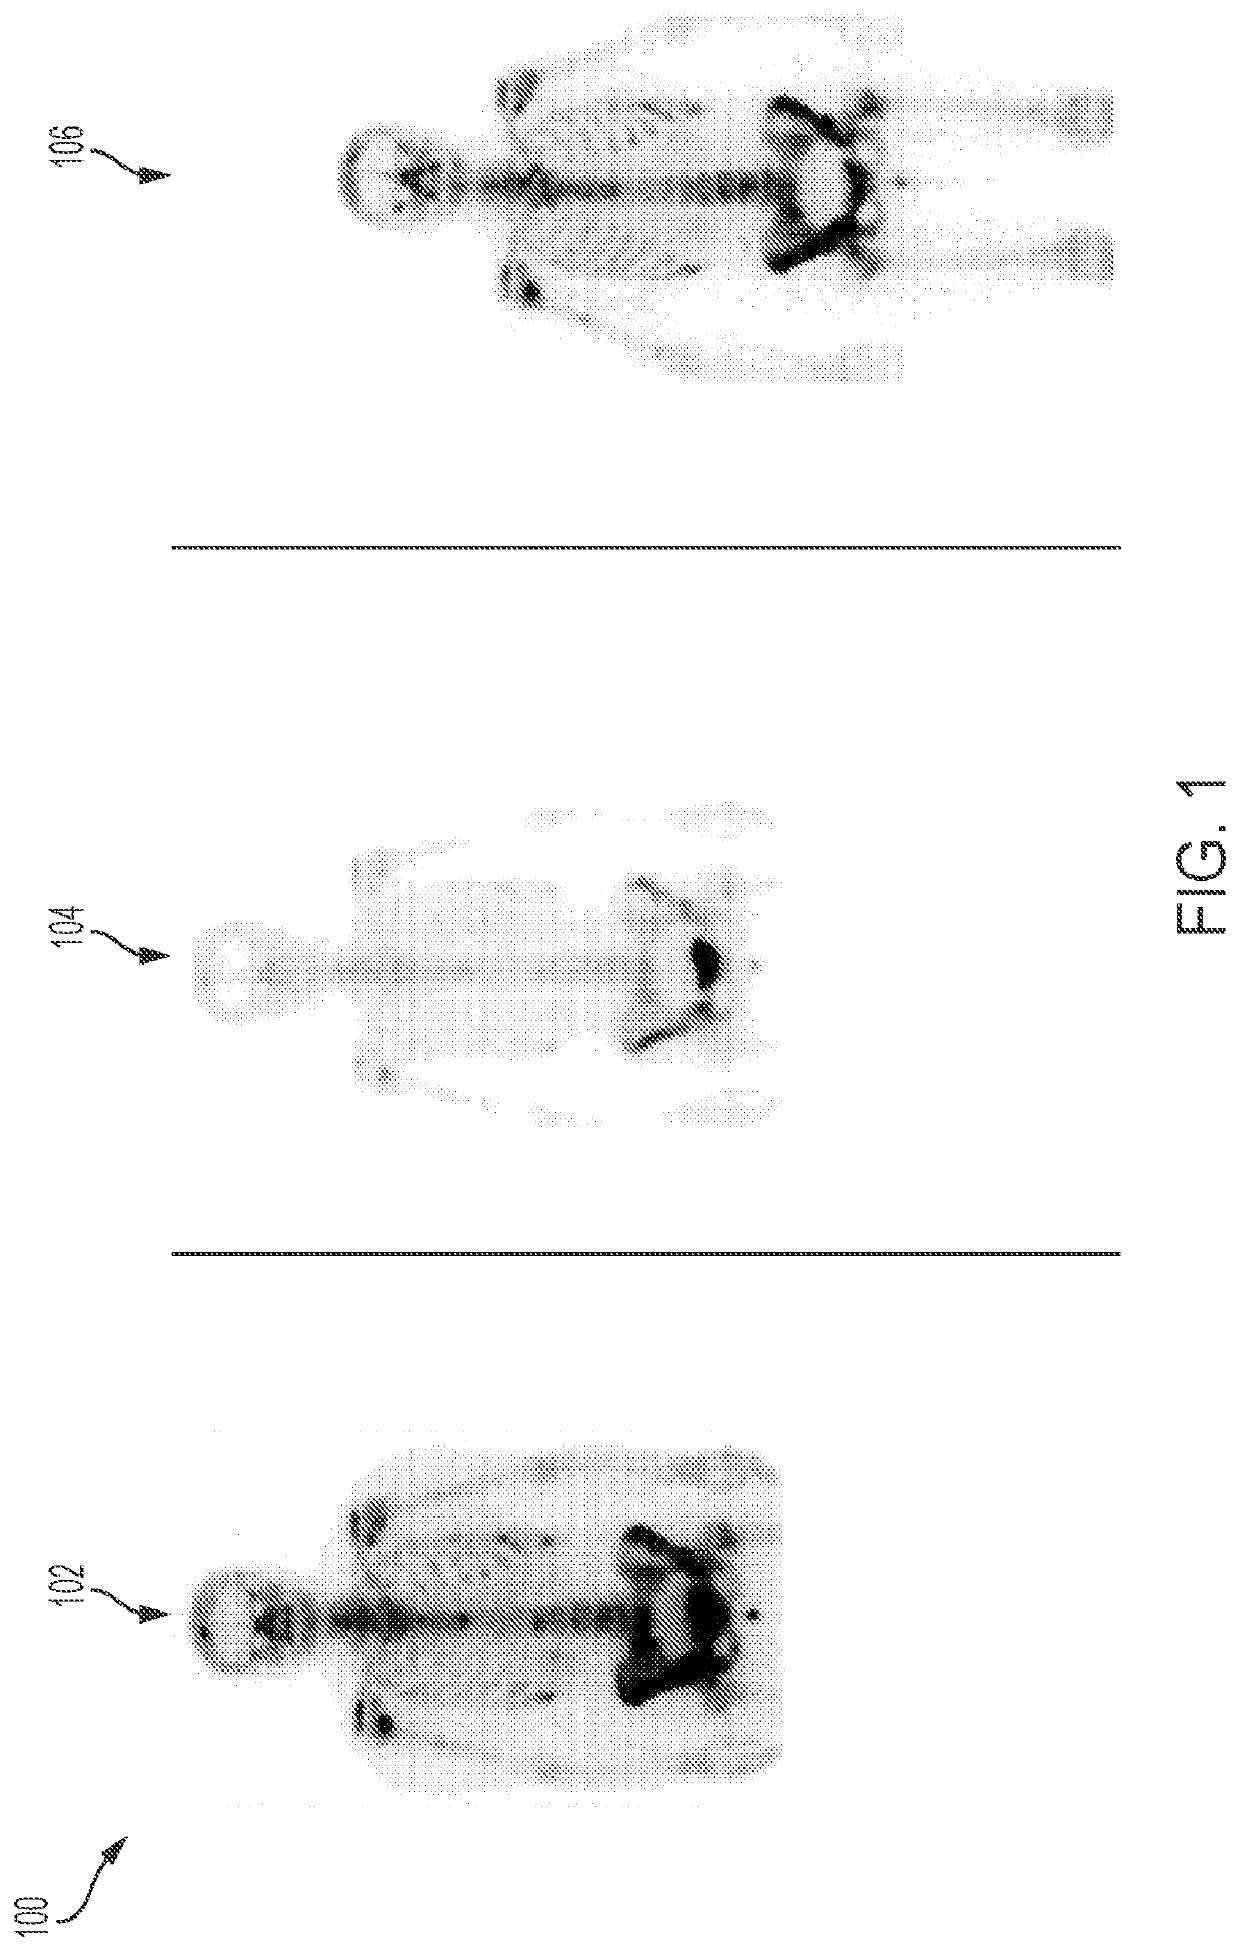 Systems and methods for interactive adjustment of intensity windowing in nuclear medicine images